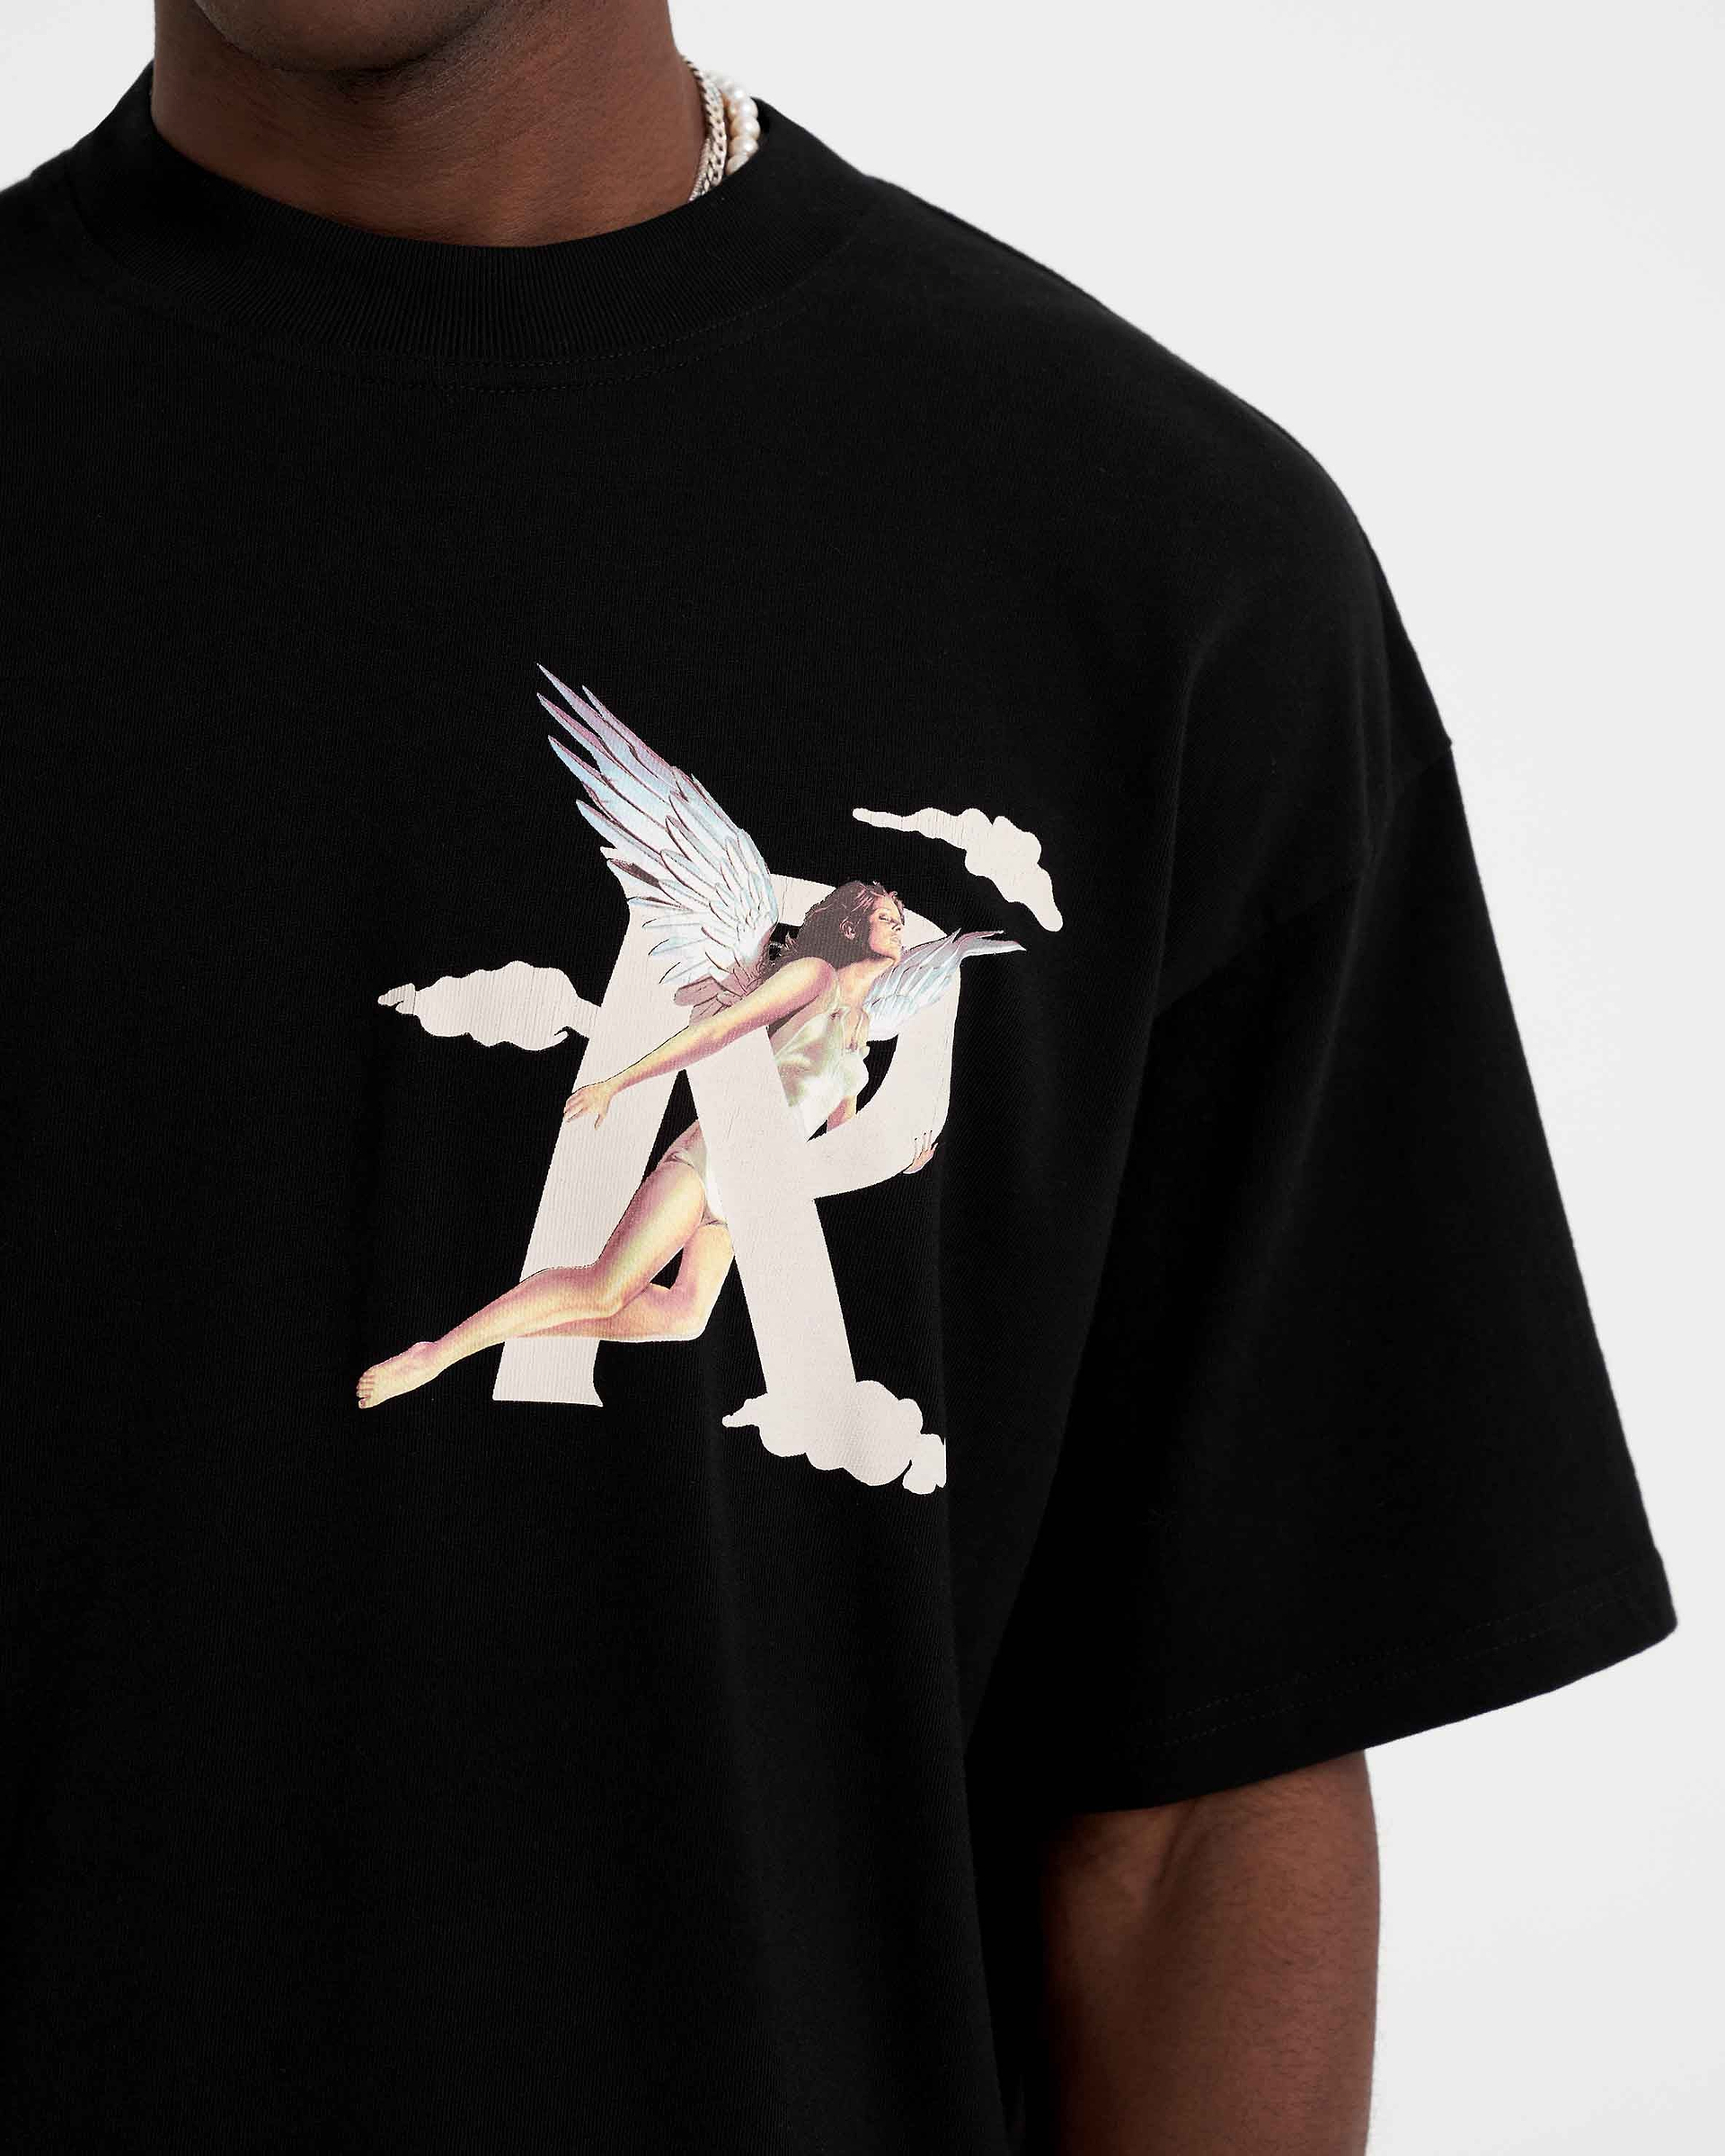 Storms In Heaven T-Shirt, Black